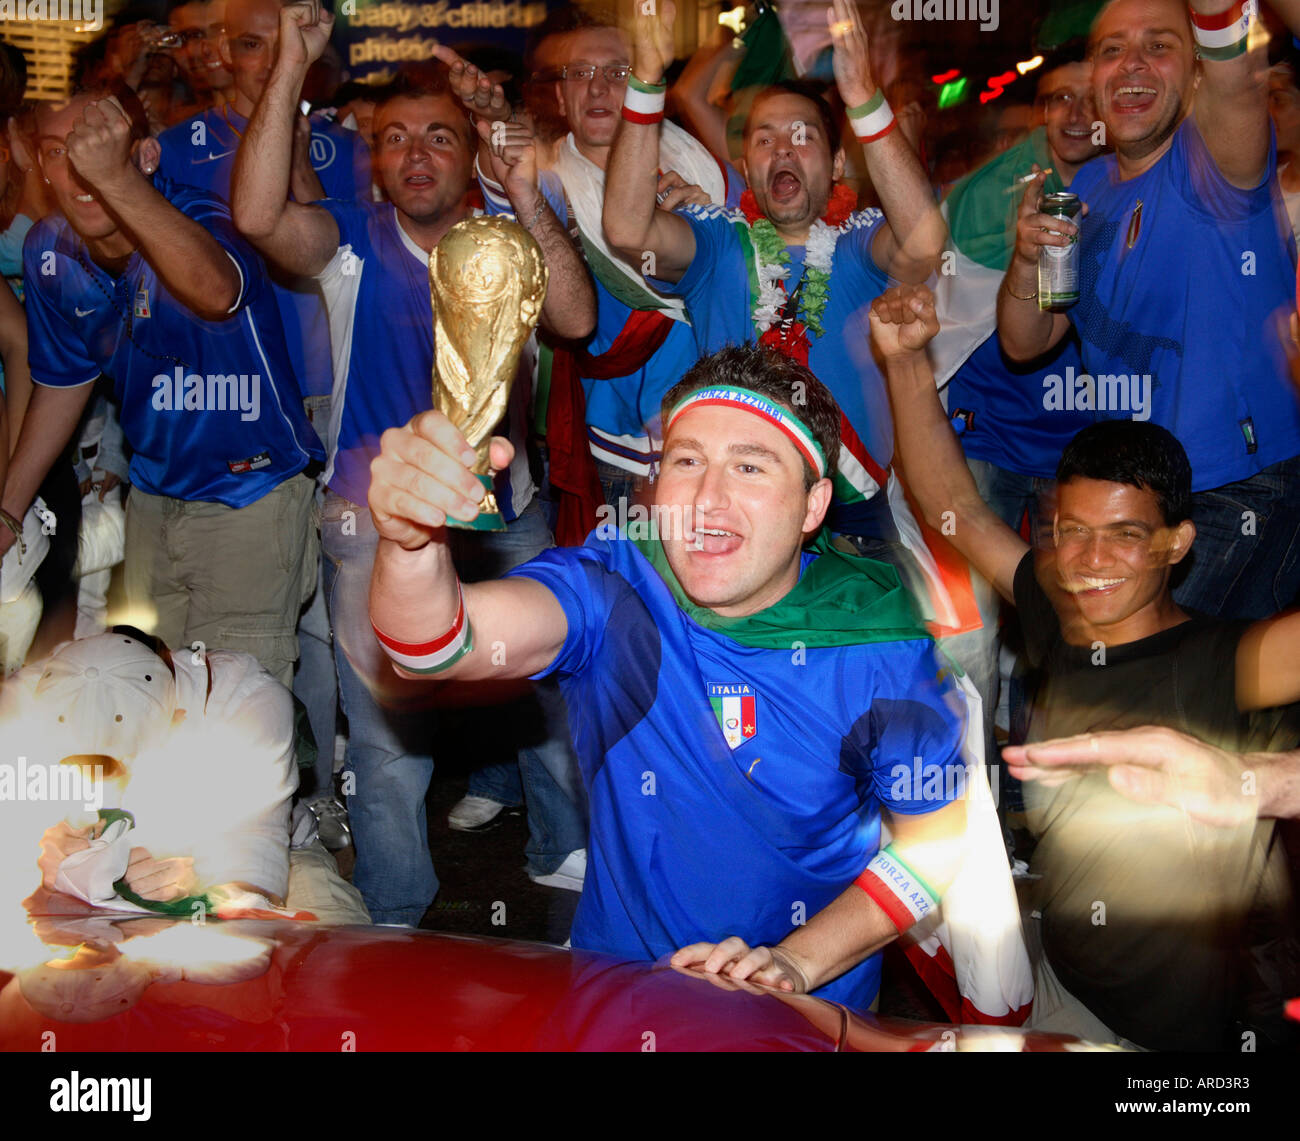 Italian fan shows off World Cup trophy to Ferarri driver in Piccadilly Circus after winning 2006 final vs France, London Stock Photo